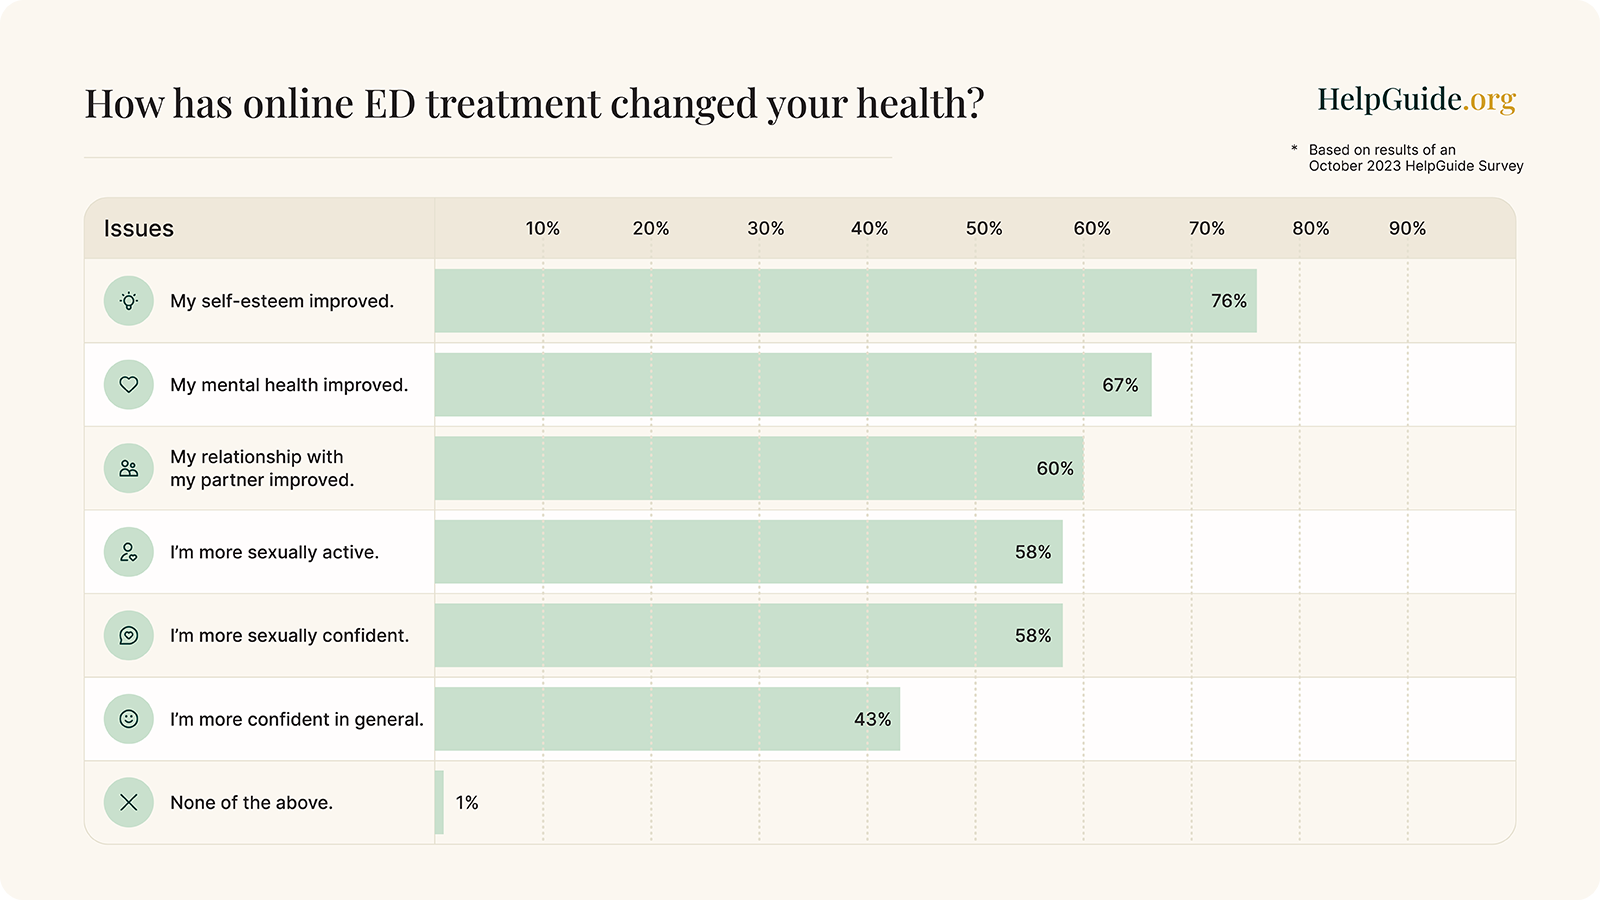 How has online ED treatment changed your health?